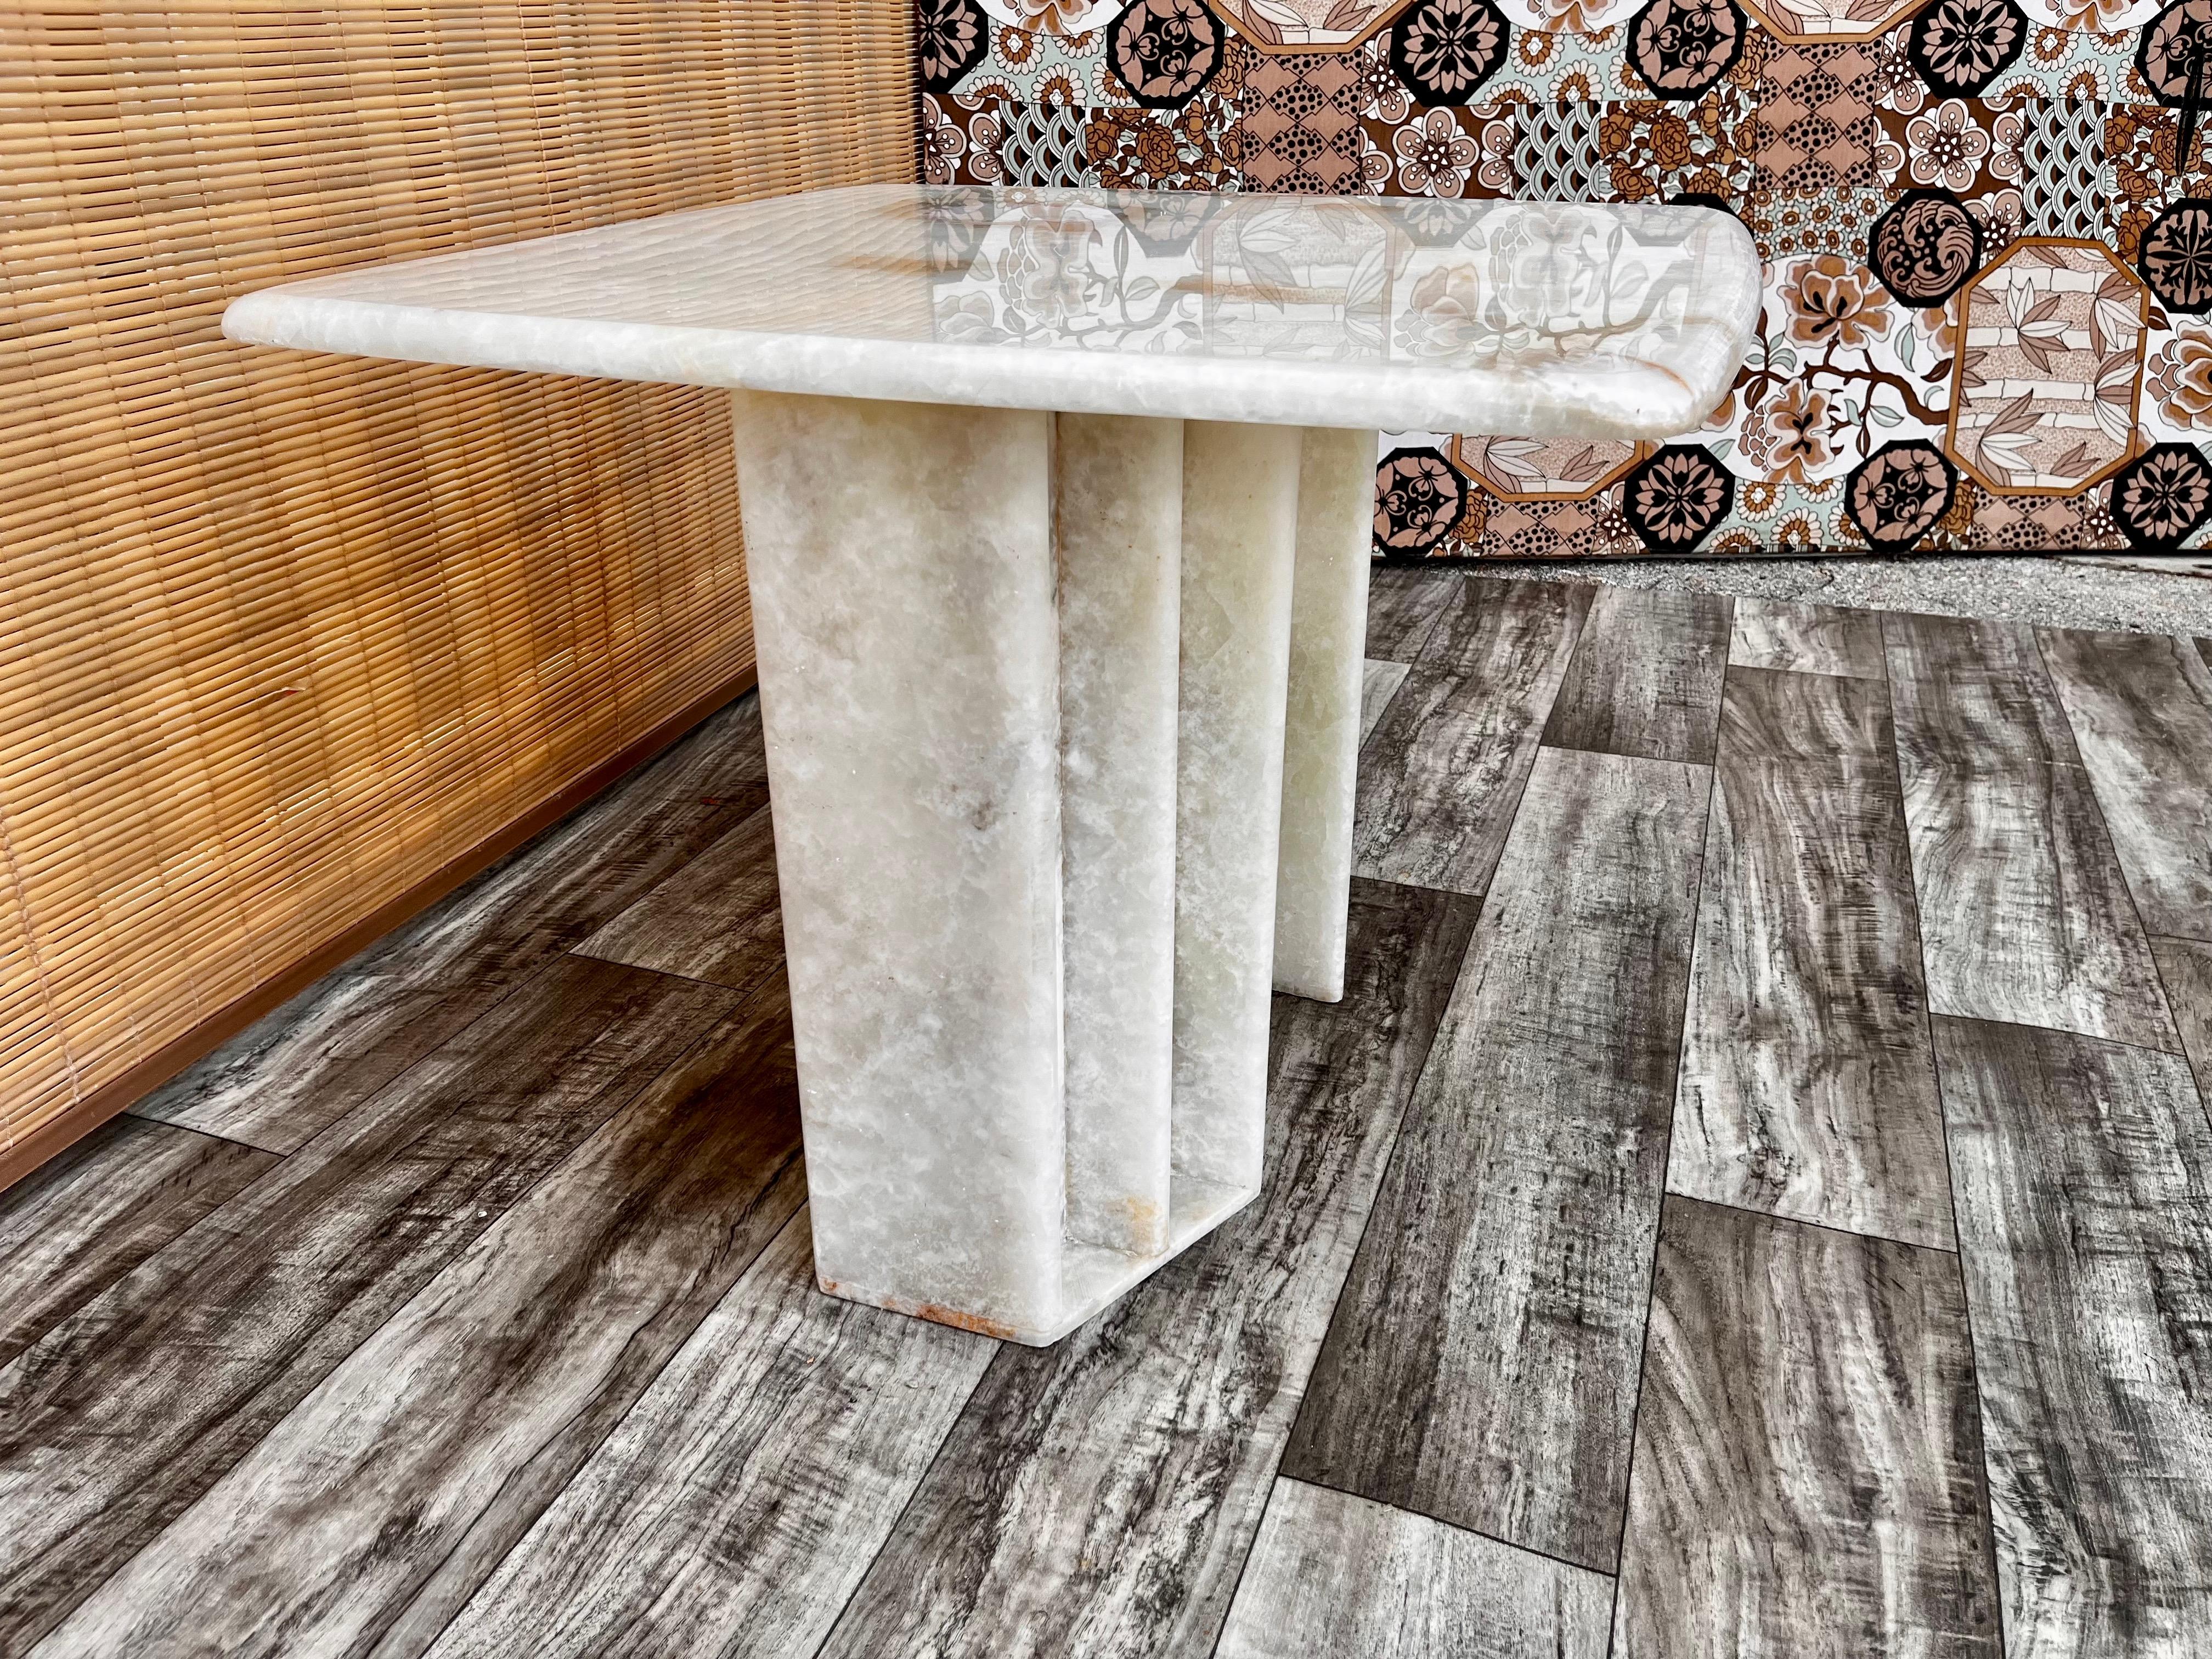 Postmodern White onyx marble occasional side table. circa 1980s
Features a nicely curved border at edges and a gorgeous translucent natural white onyx marble with a white icy background and veins of golds, tan, and grays.
The base can be used in